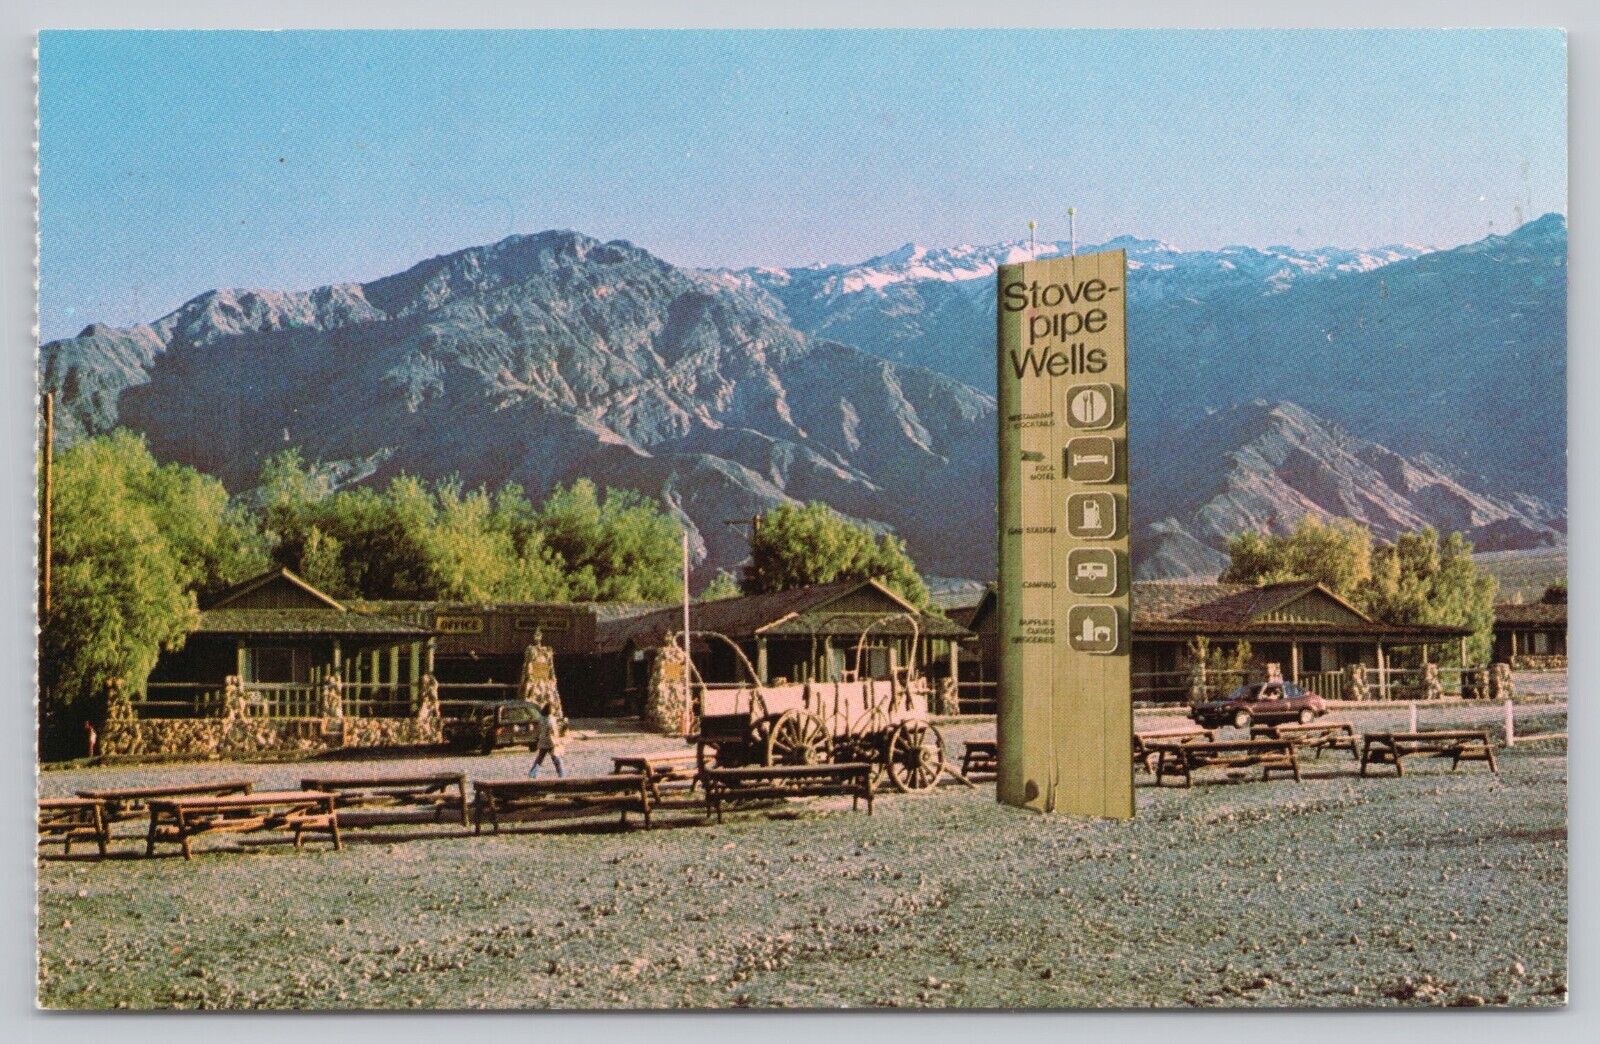 Death Valley California Stove Pipe Wells Village Fred Harvey, Vintage Postcard